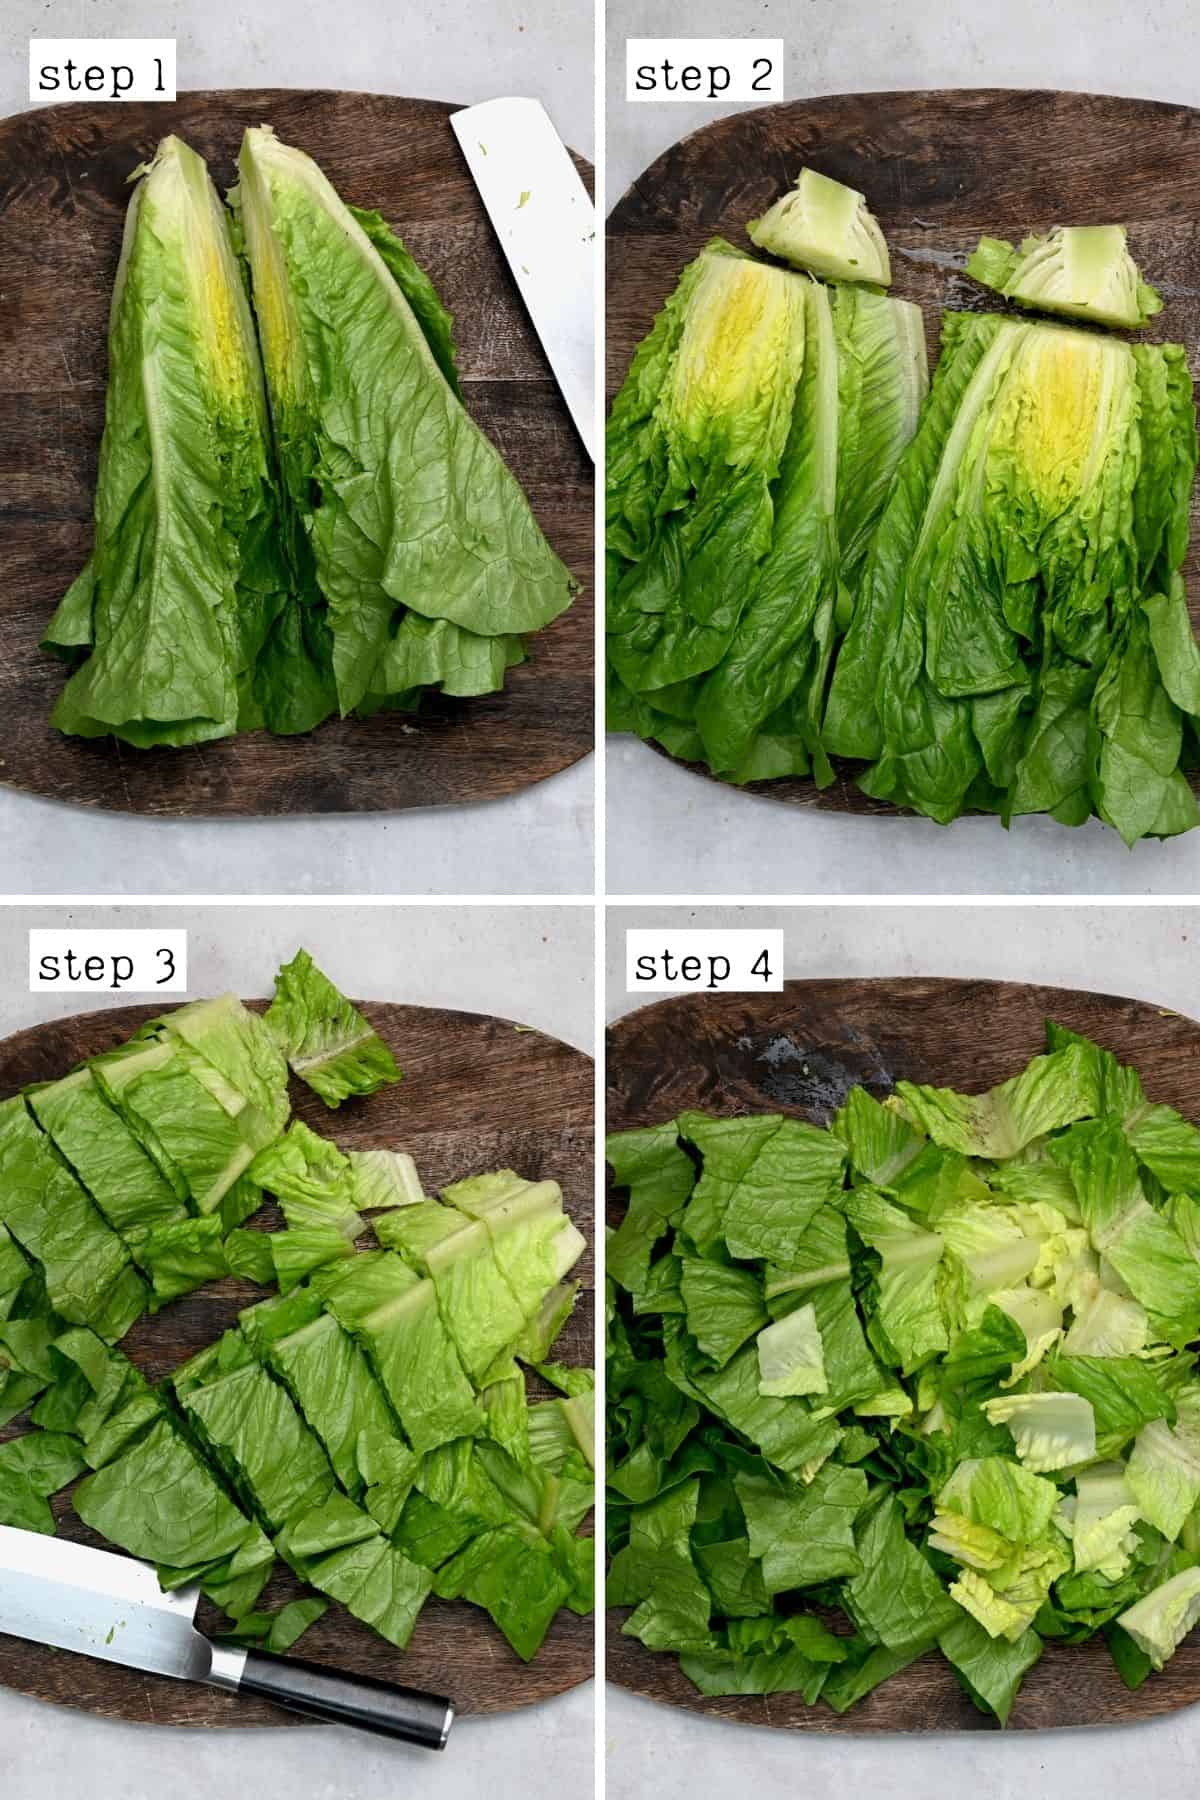 Steps for cutting lettuce into small pieces